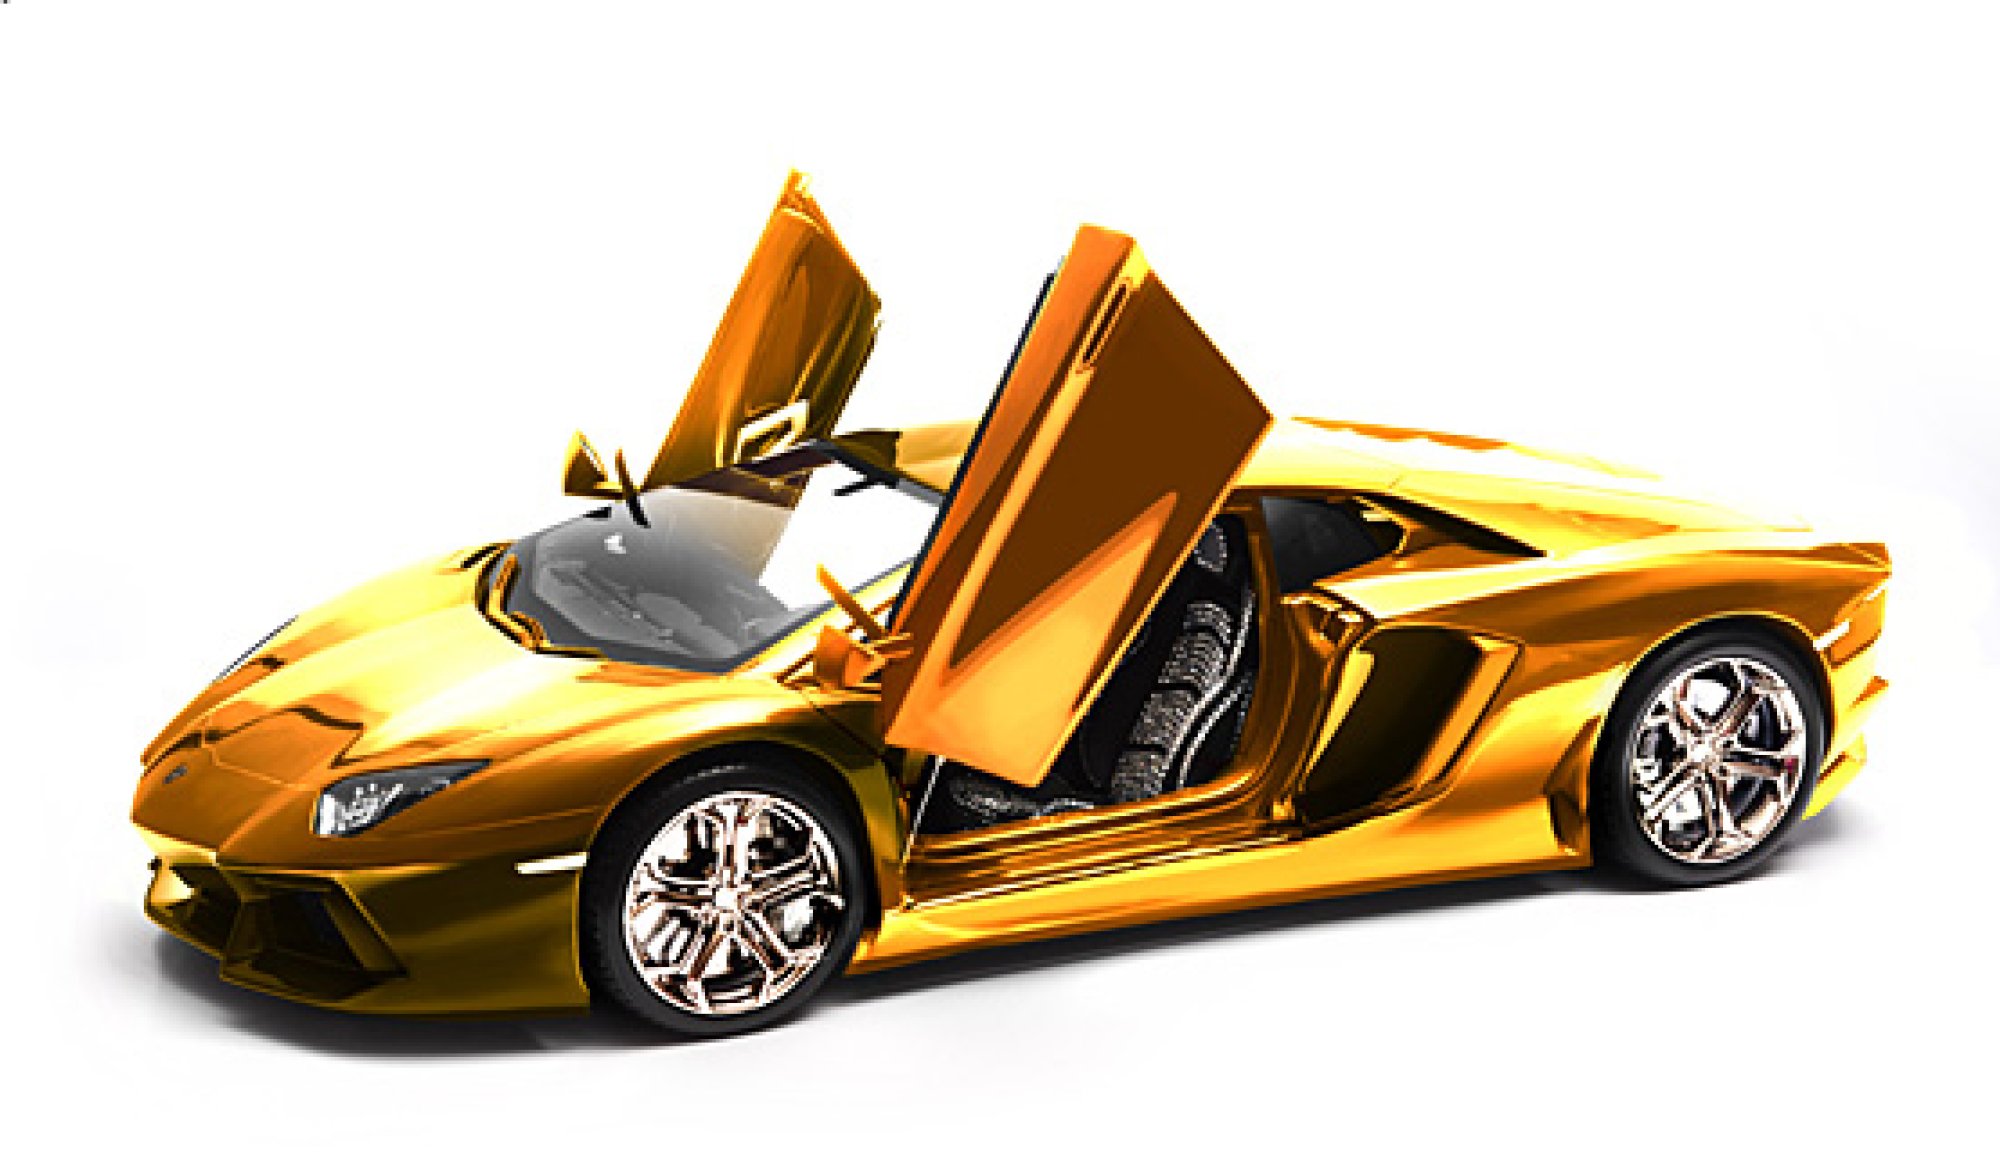 This Gold-Plated Lamborghini Model Car Will Set You Back $7.5 ...